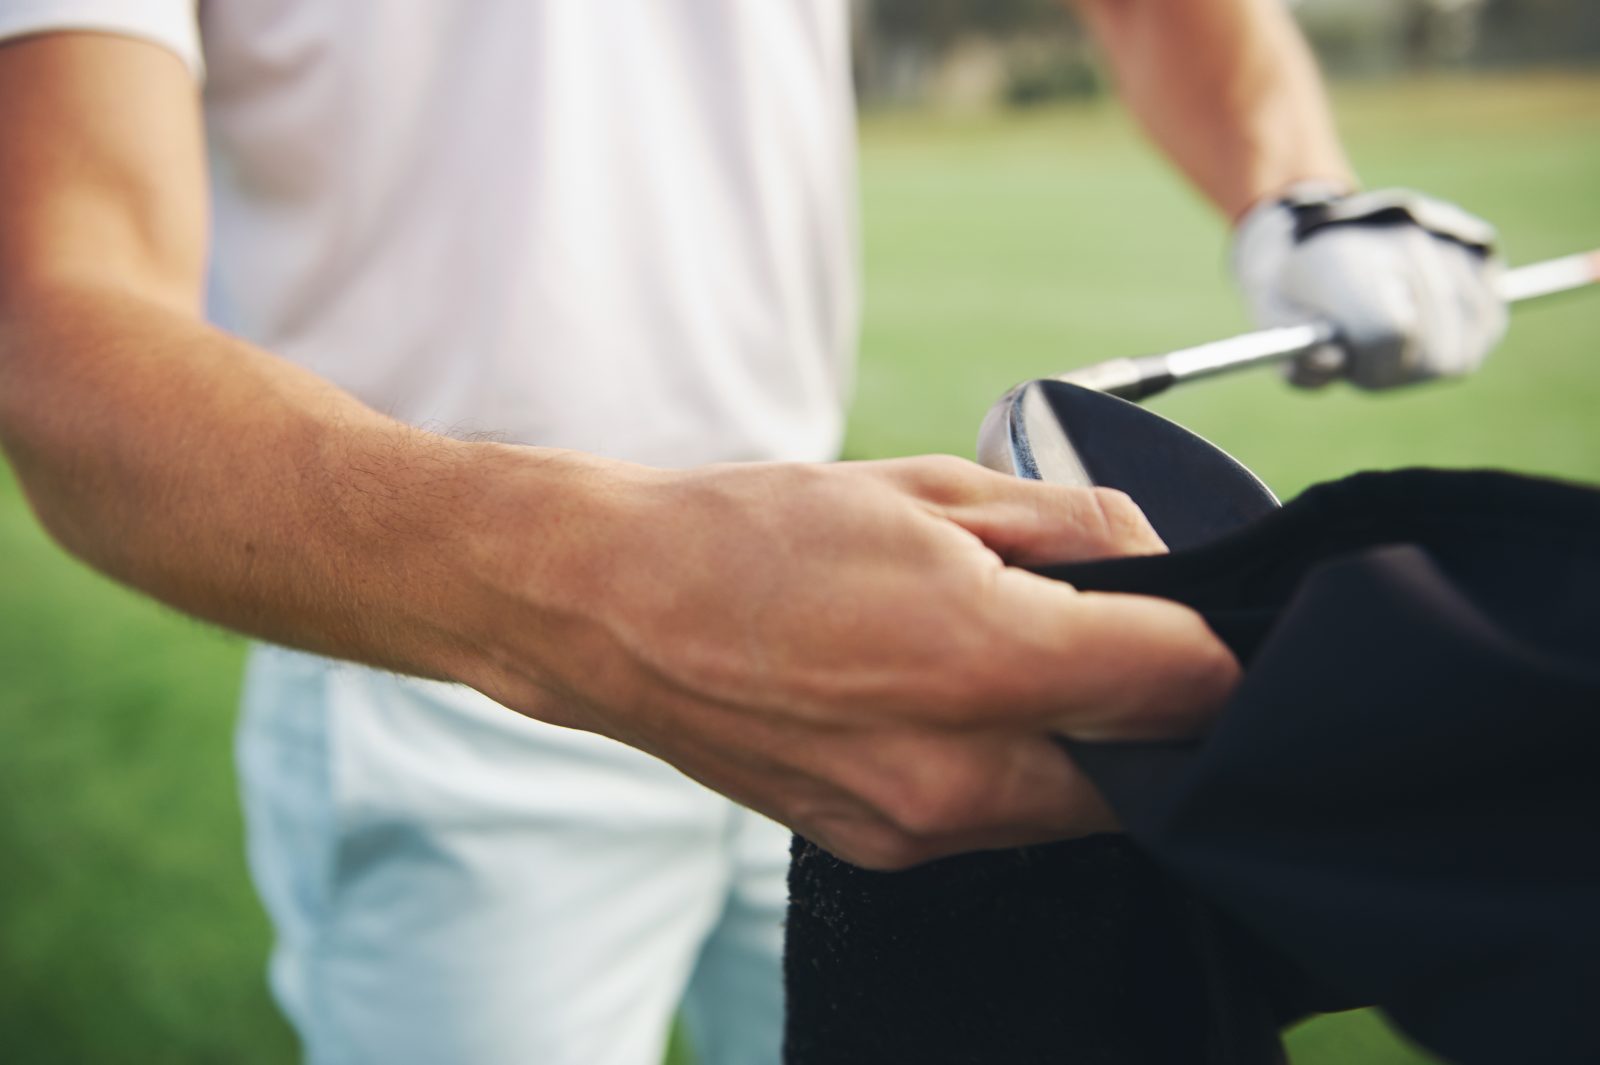 Ways to Properly Care for Your Golf Clubs and Equipment